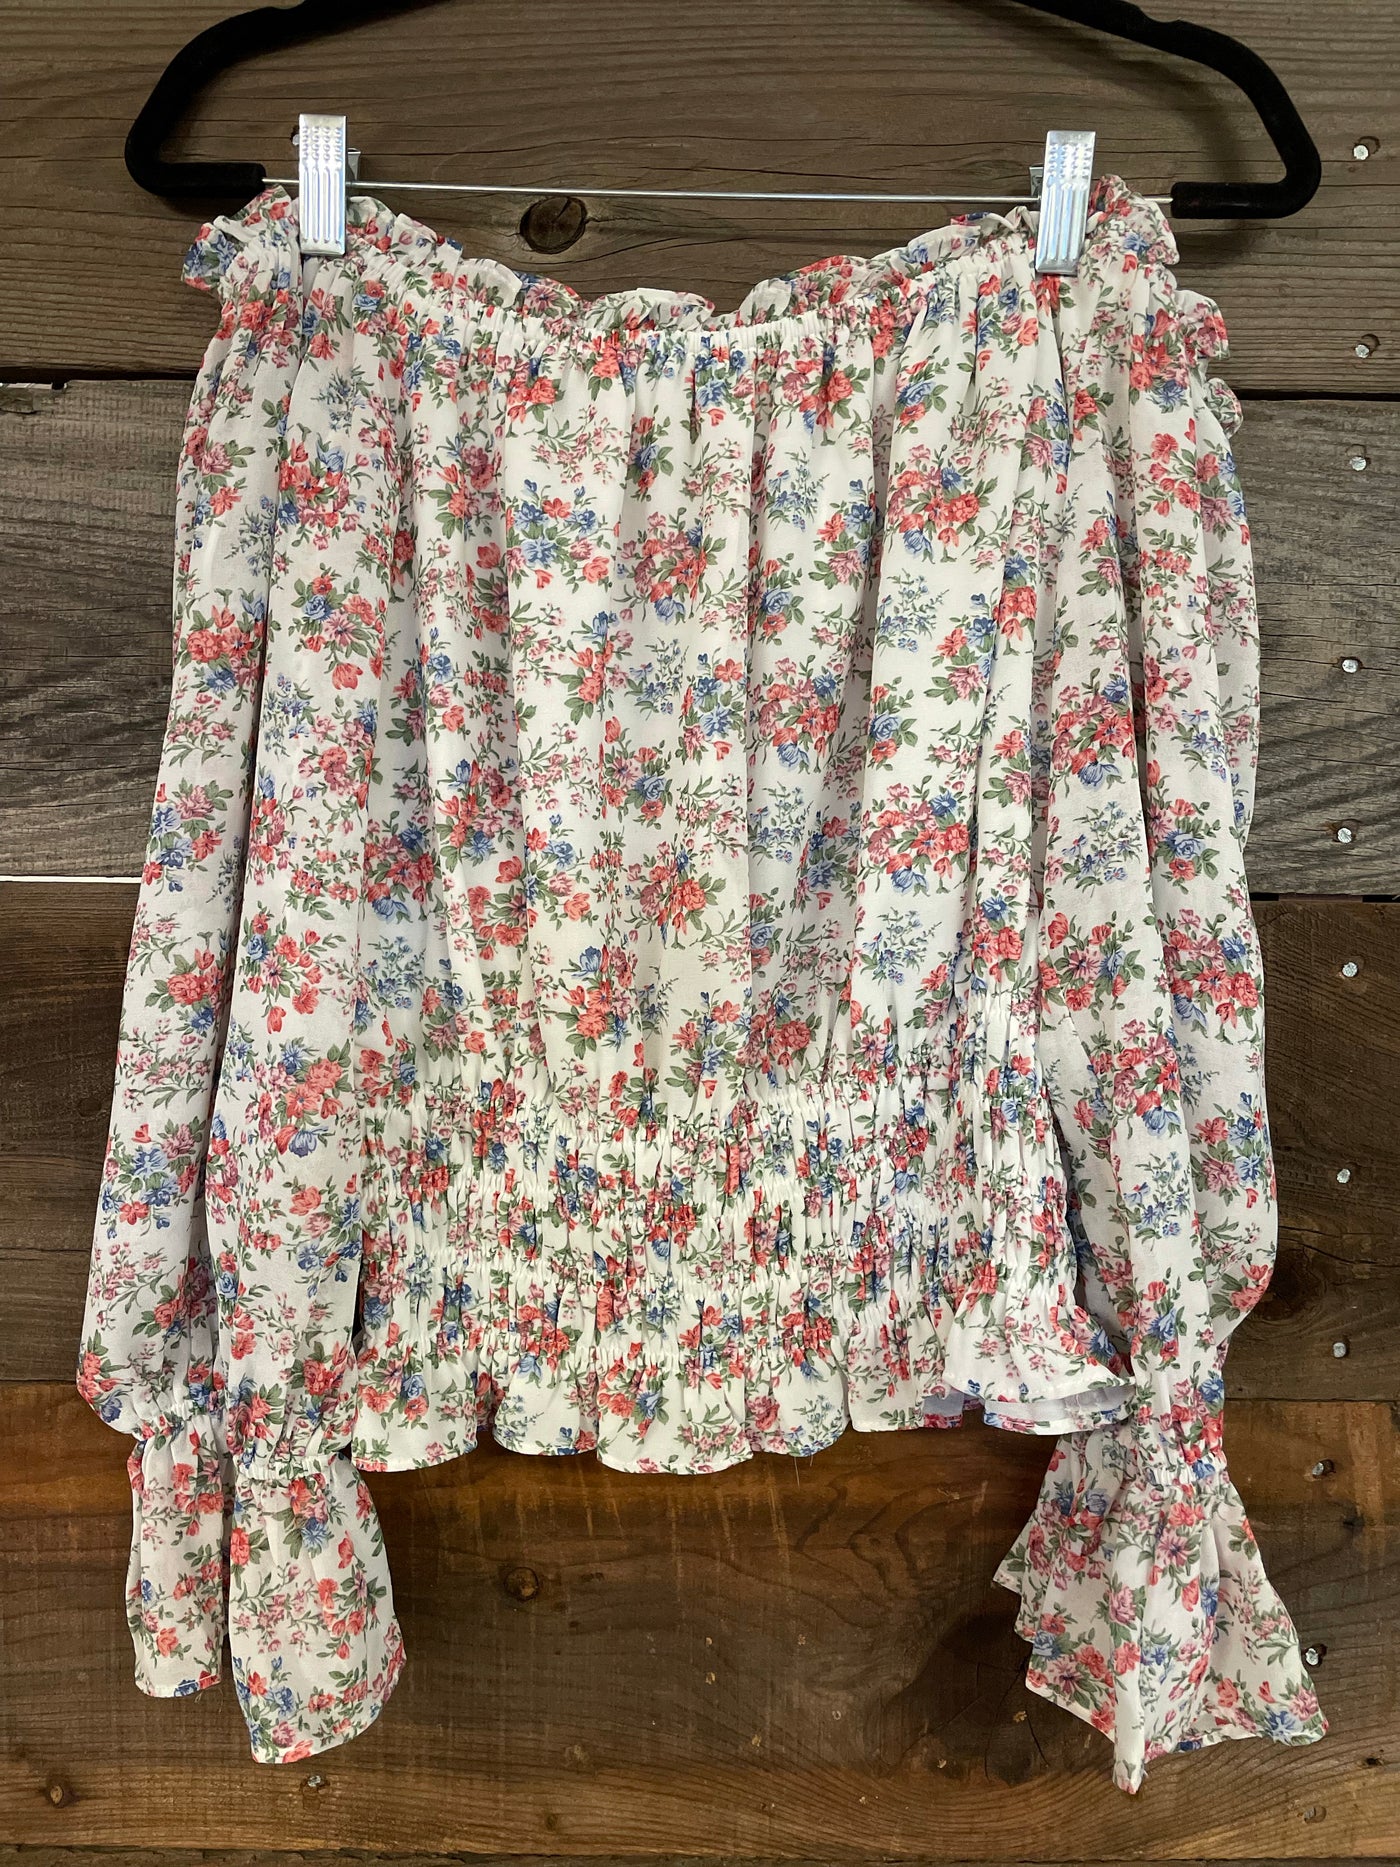 The Adeline Blouse